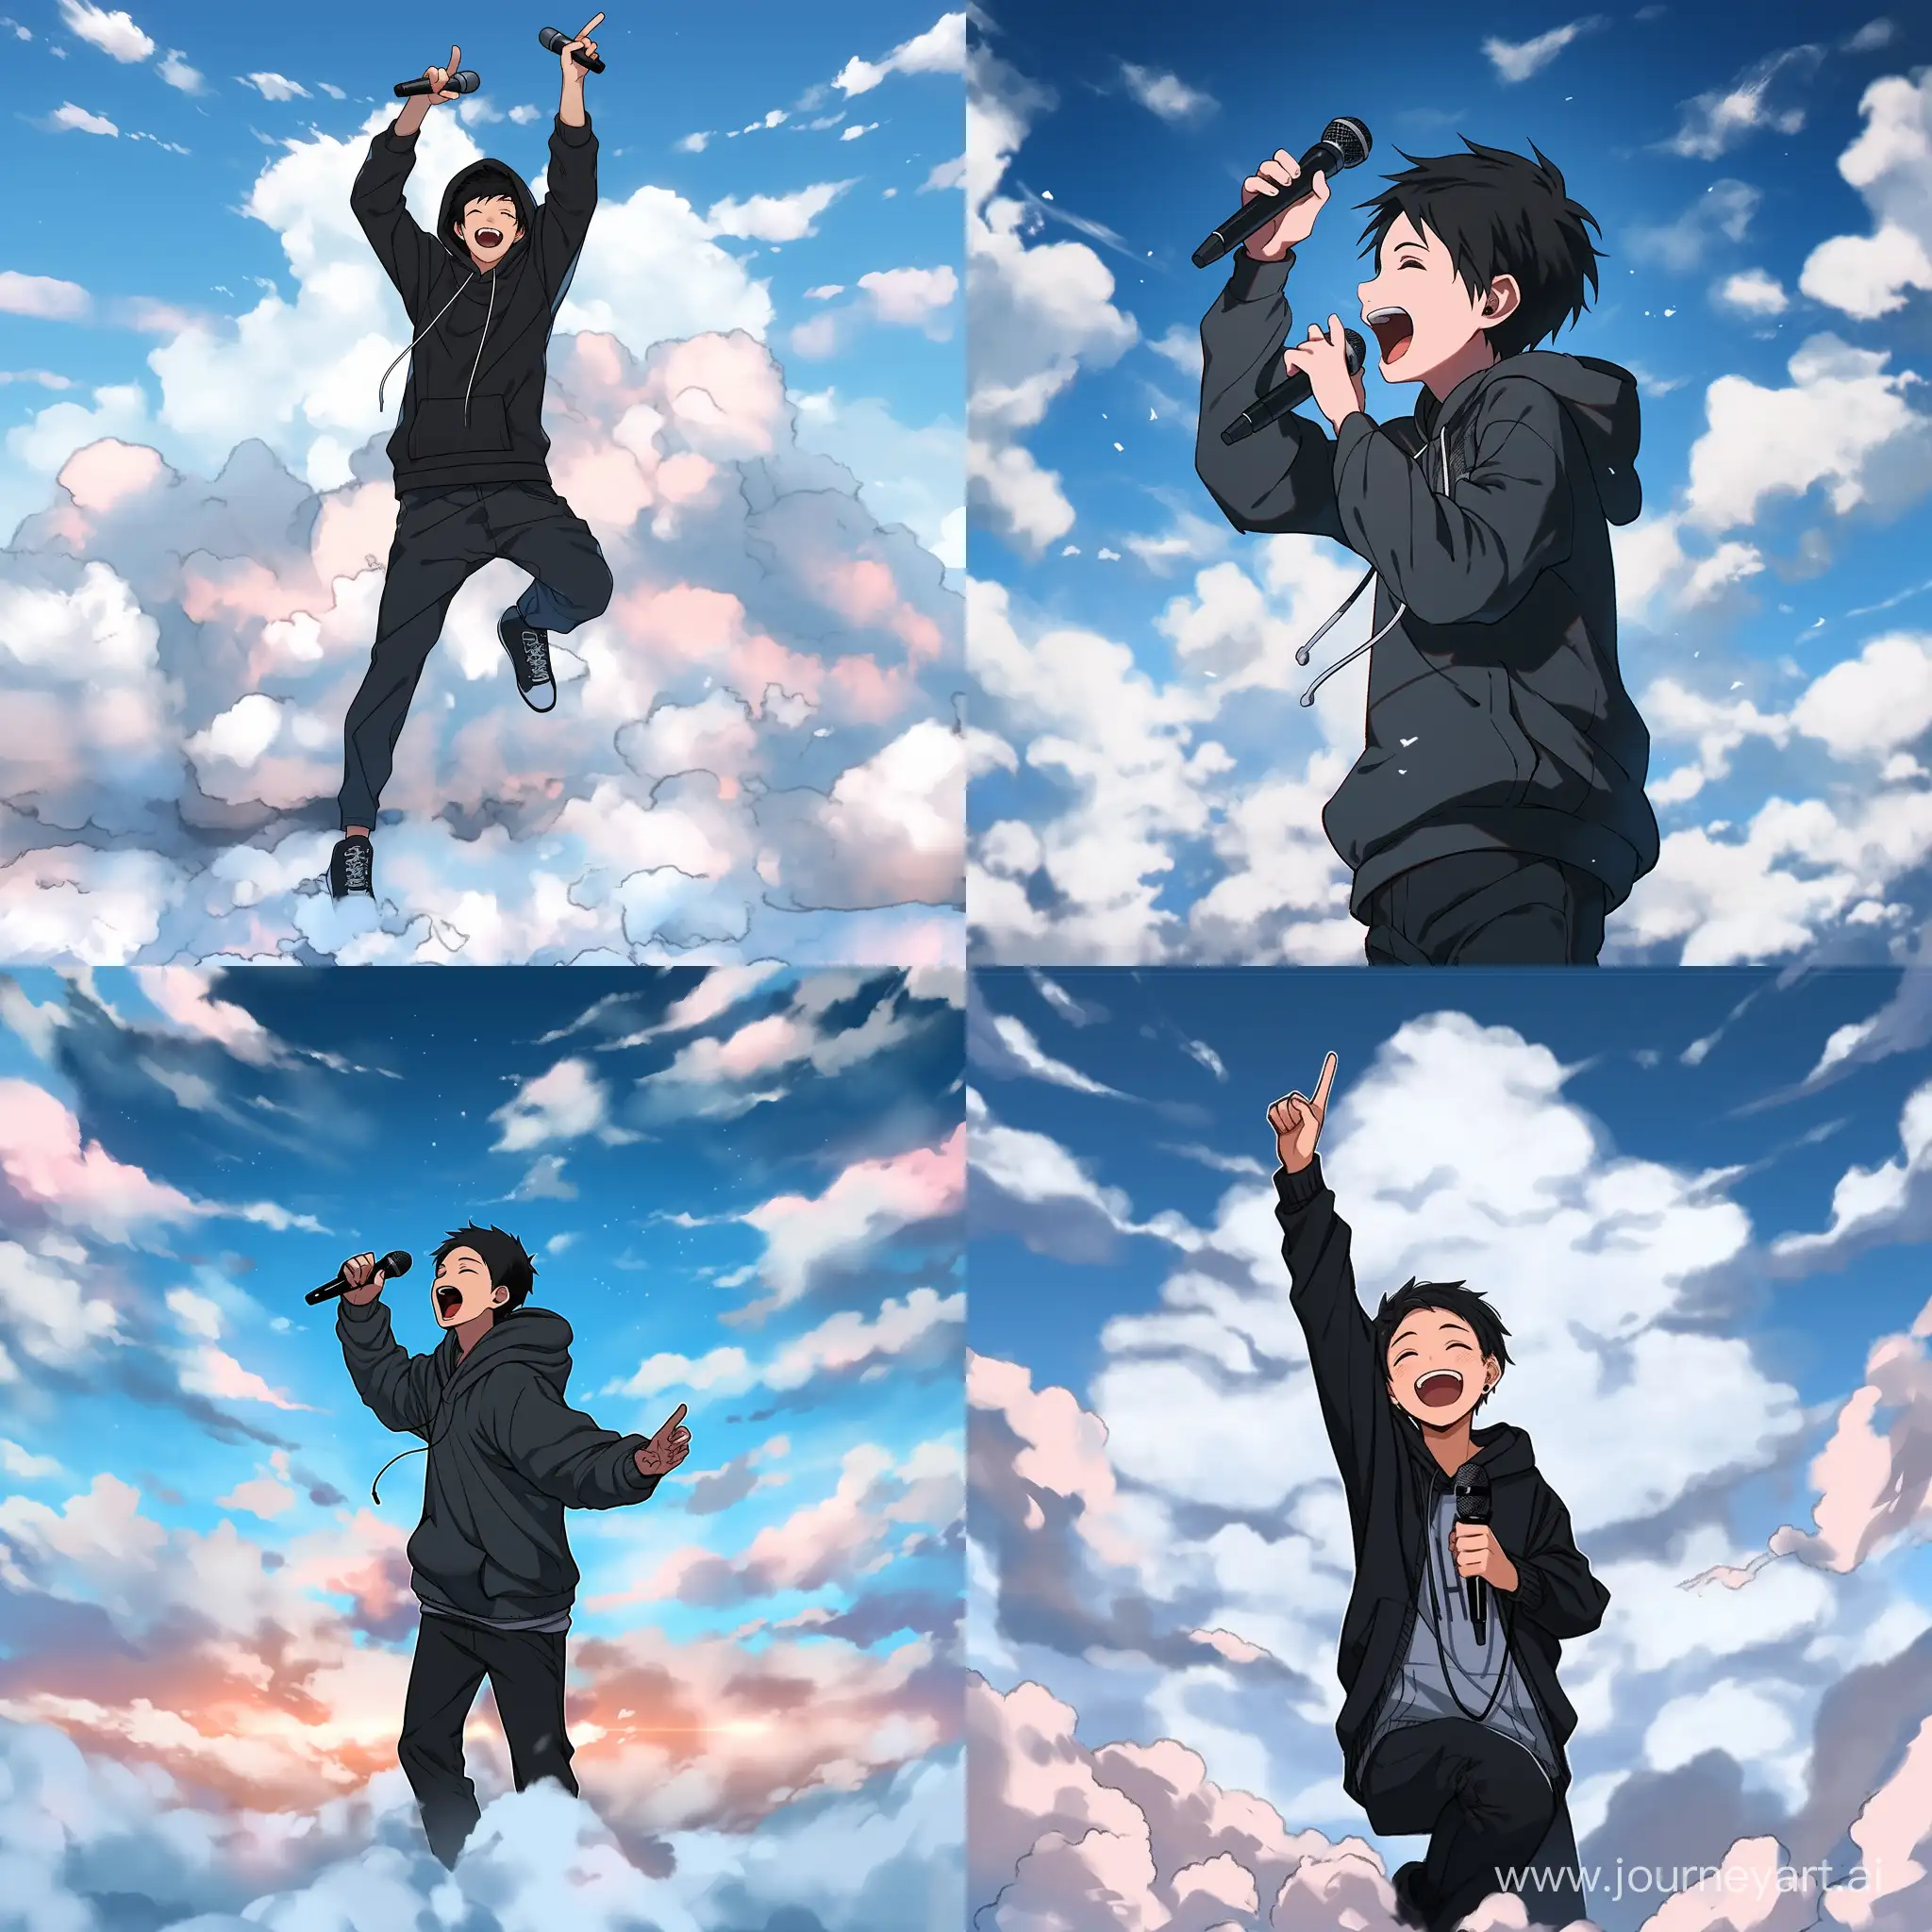 Young male artist, black hoodie, back turned, standing on peak, Singing microphone in hand, mesmerizing helding up like victory vibrant pose, Sky and clouds in front, Blue sku in the background --niji